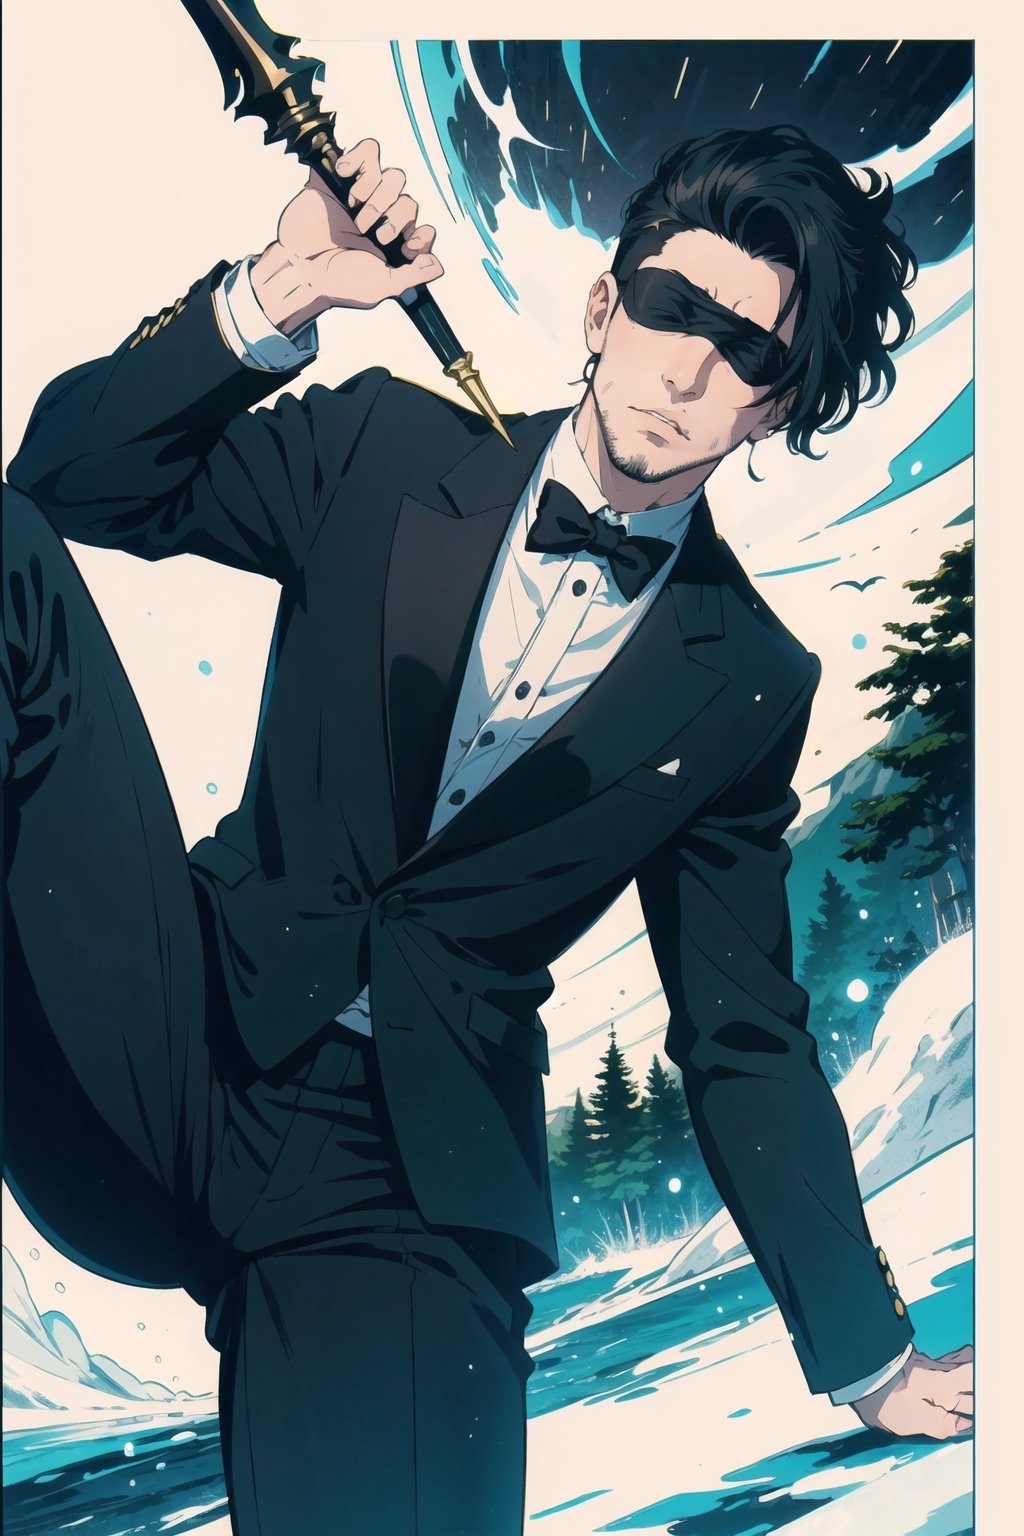 (masterpiece),1boy,vivid,a handsome maestro man, black blindfold cover all his eyes, wearing slick green tuxedo,wavy undercut hair,multicolored hair,green bangs,black anklepants,. 20 years old, thin beard, black silver wand,aurora,snow mountain, forest,solo,white background,evil face,prince vibe